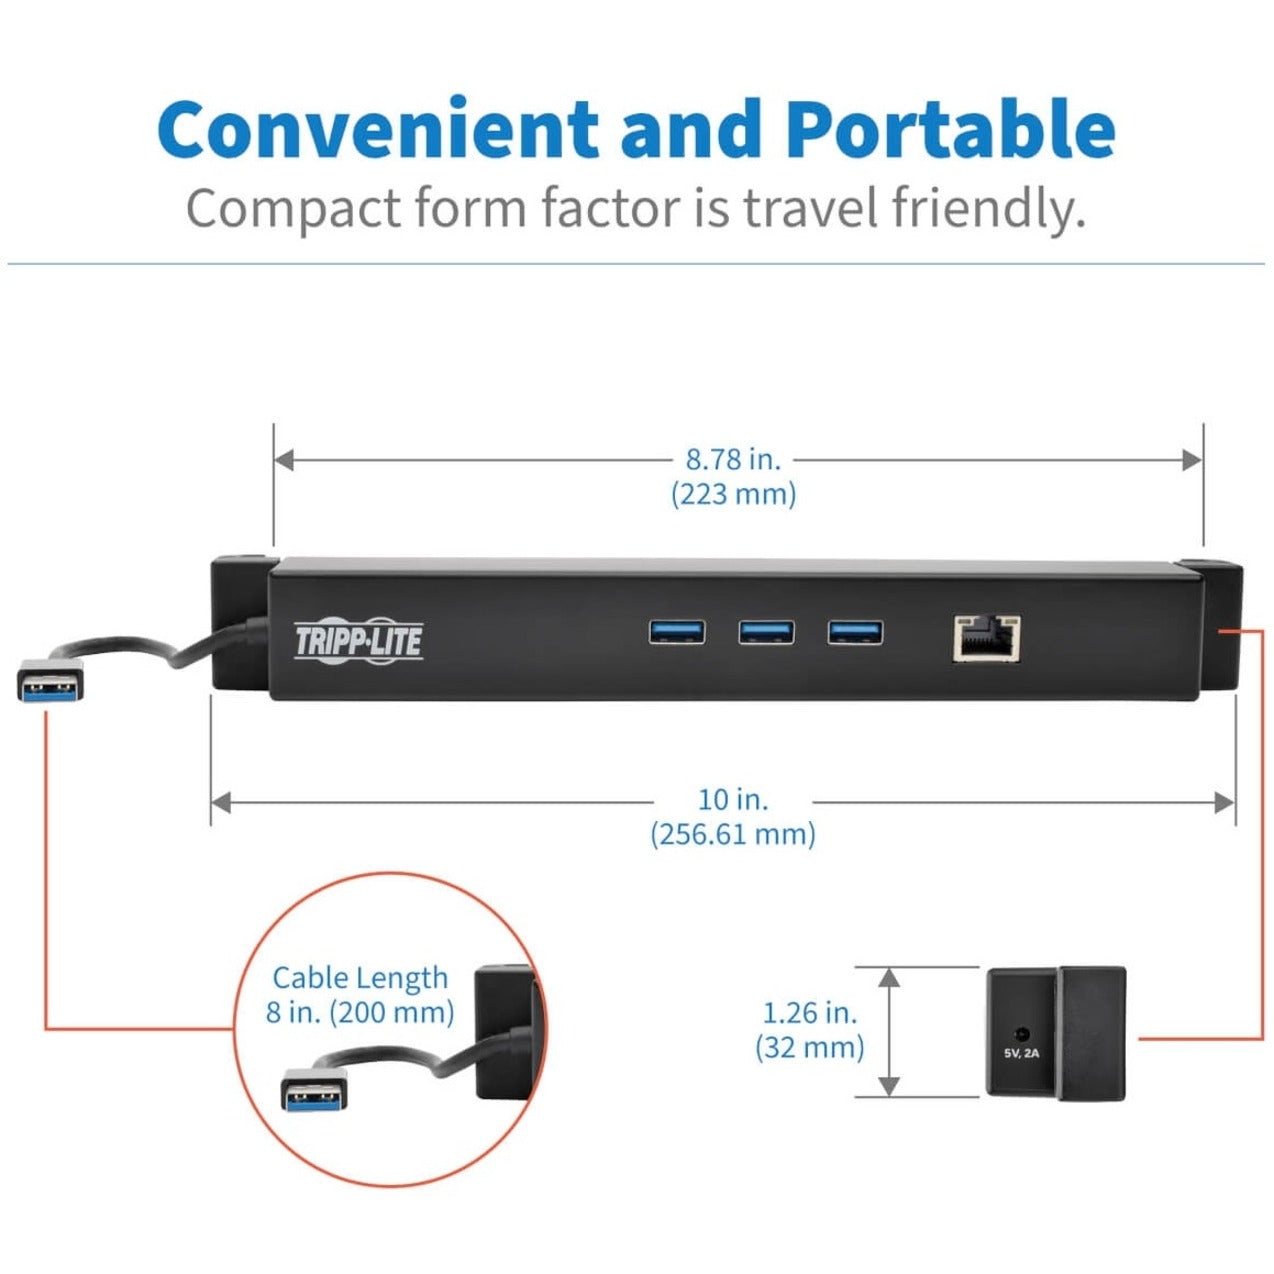 Tripp Lite U342-GU3 USB 3.0 Docking Station for Microsoft Surface and Surface Pro, USB-A and Gigabit